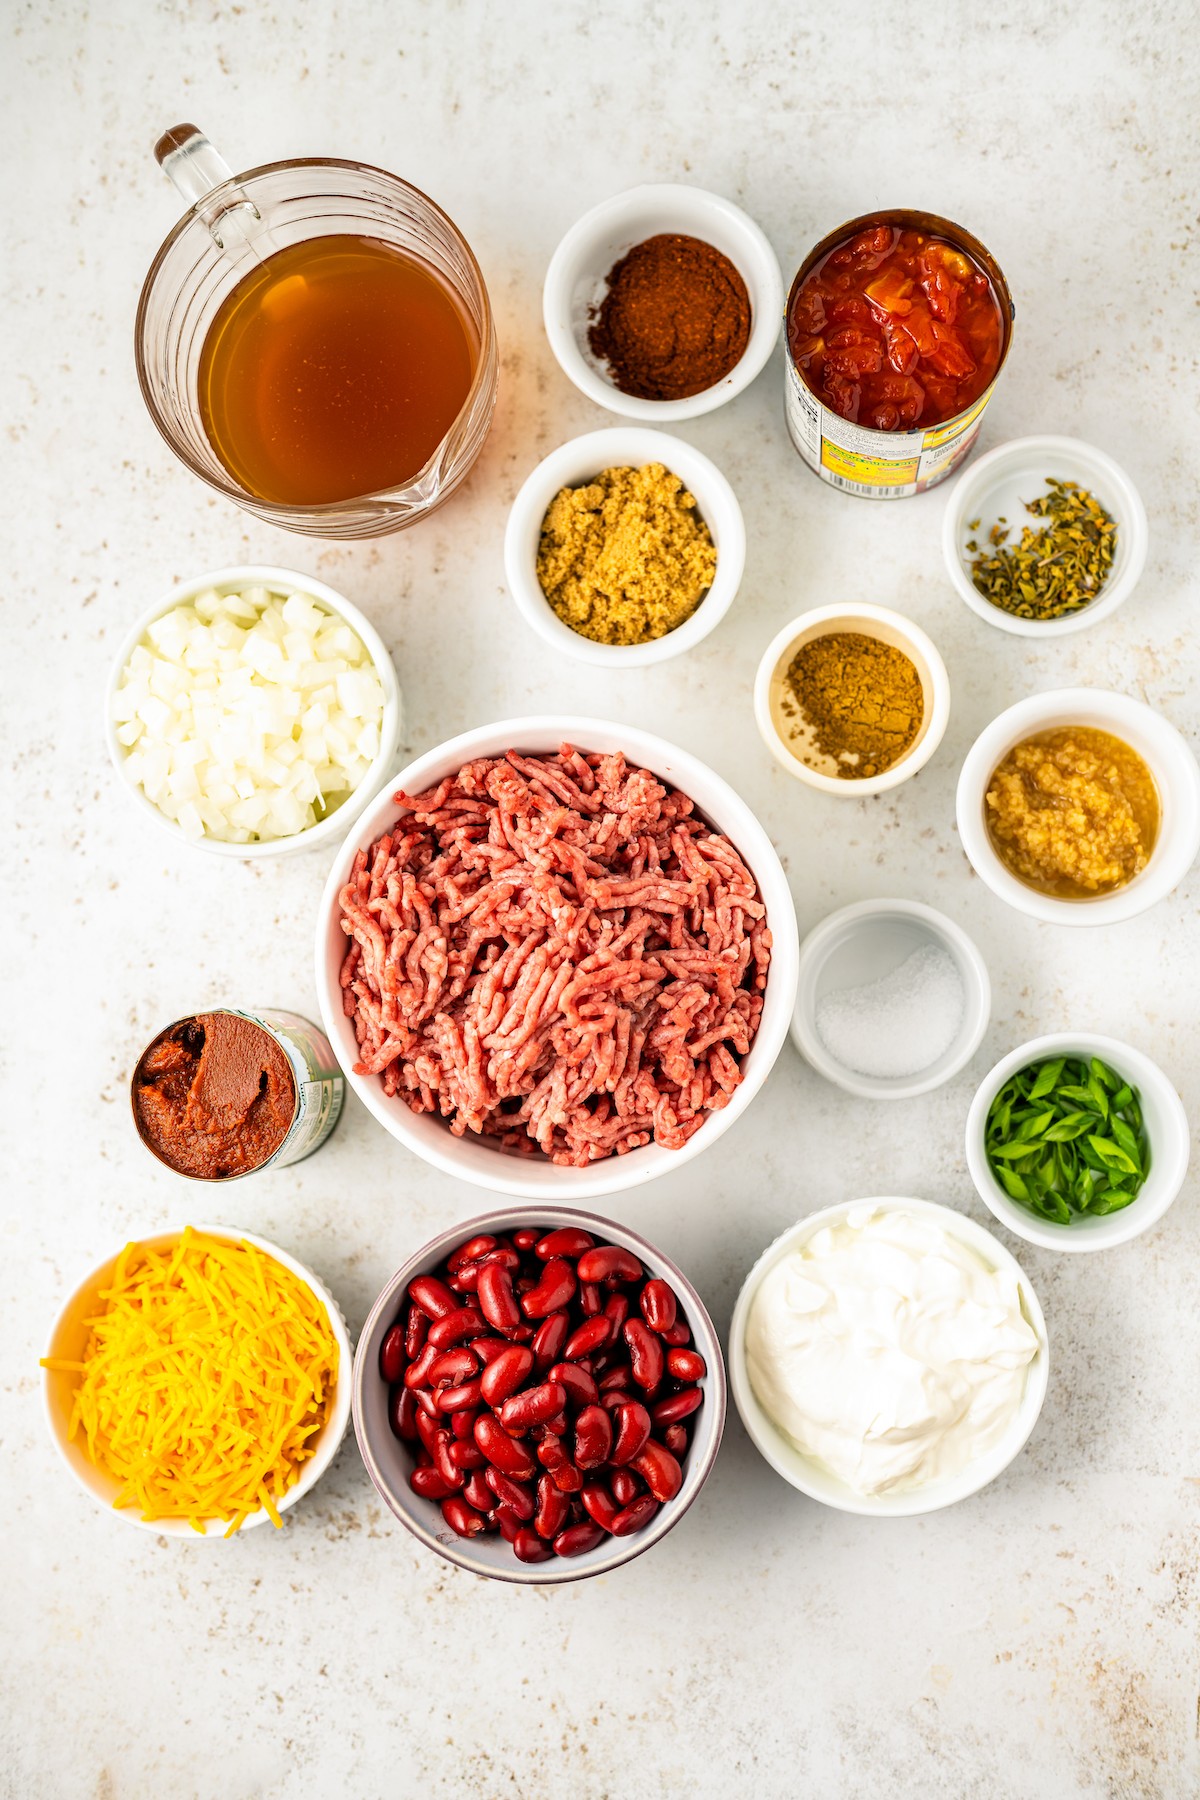 Ingredients for hot dog chili, measured and arranged on a work surface.